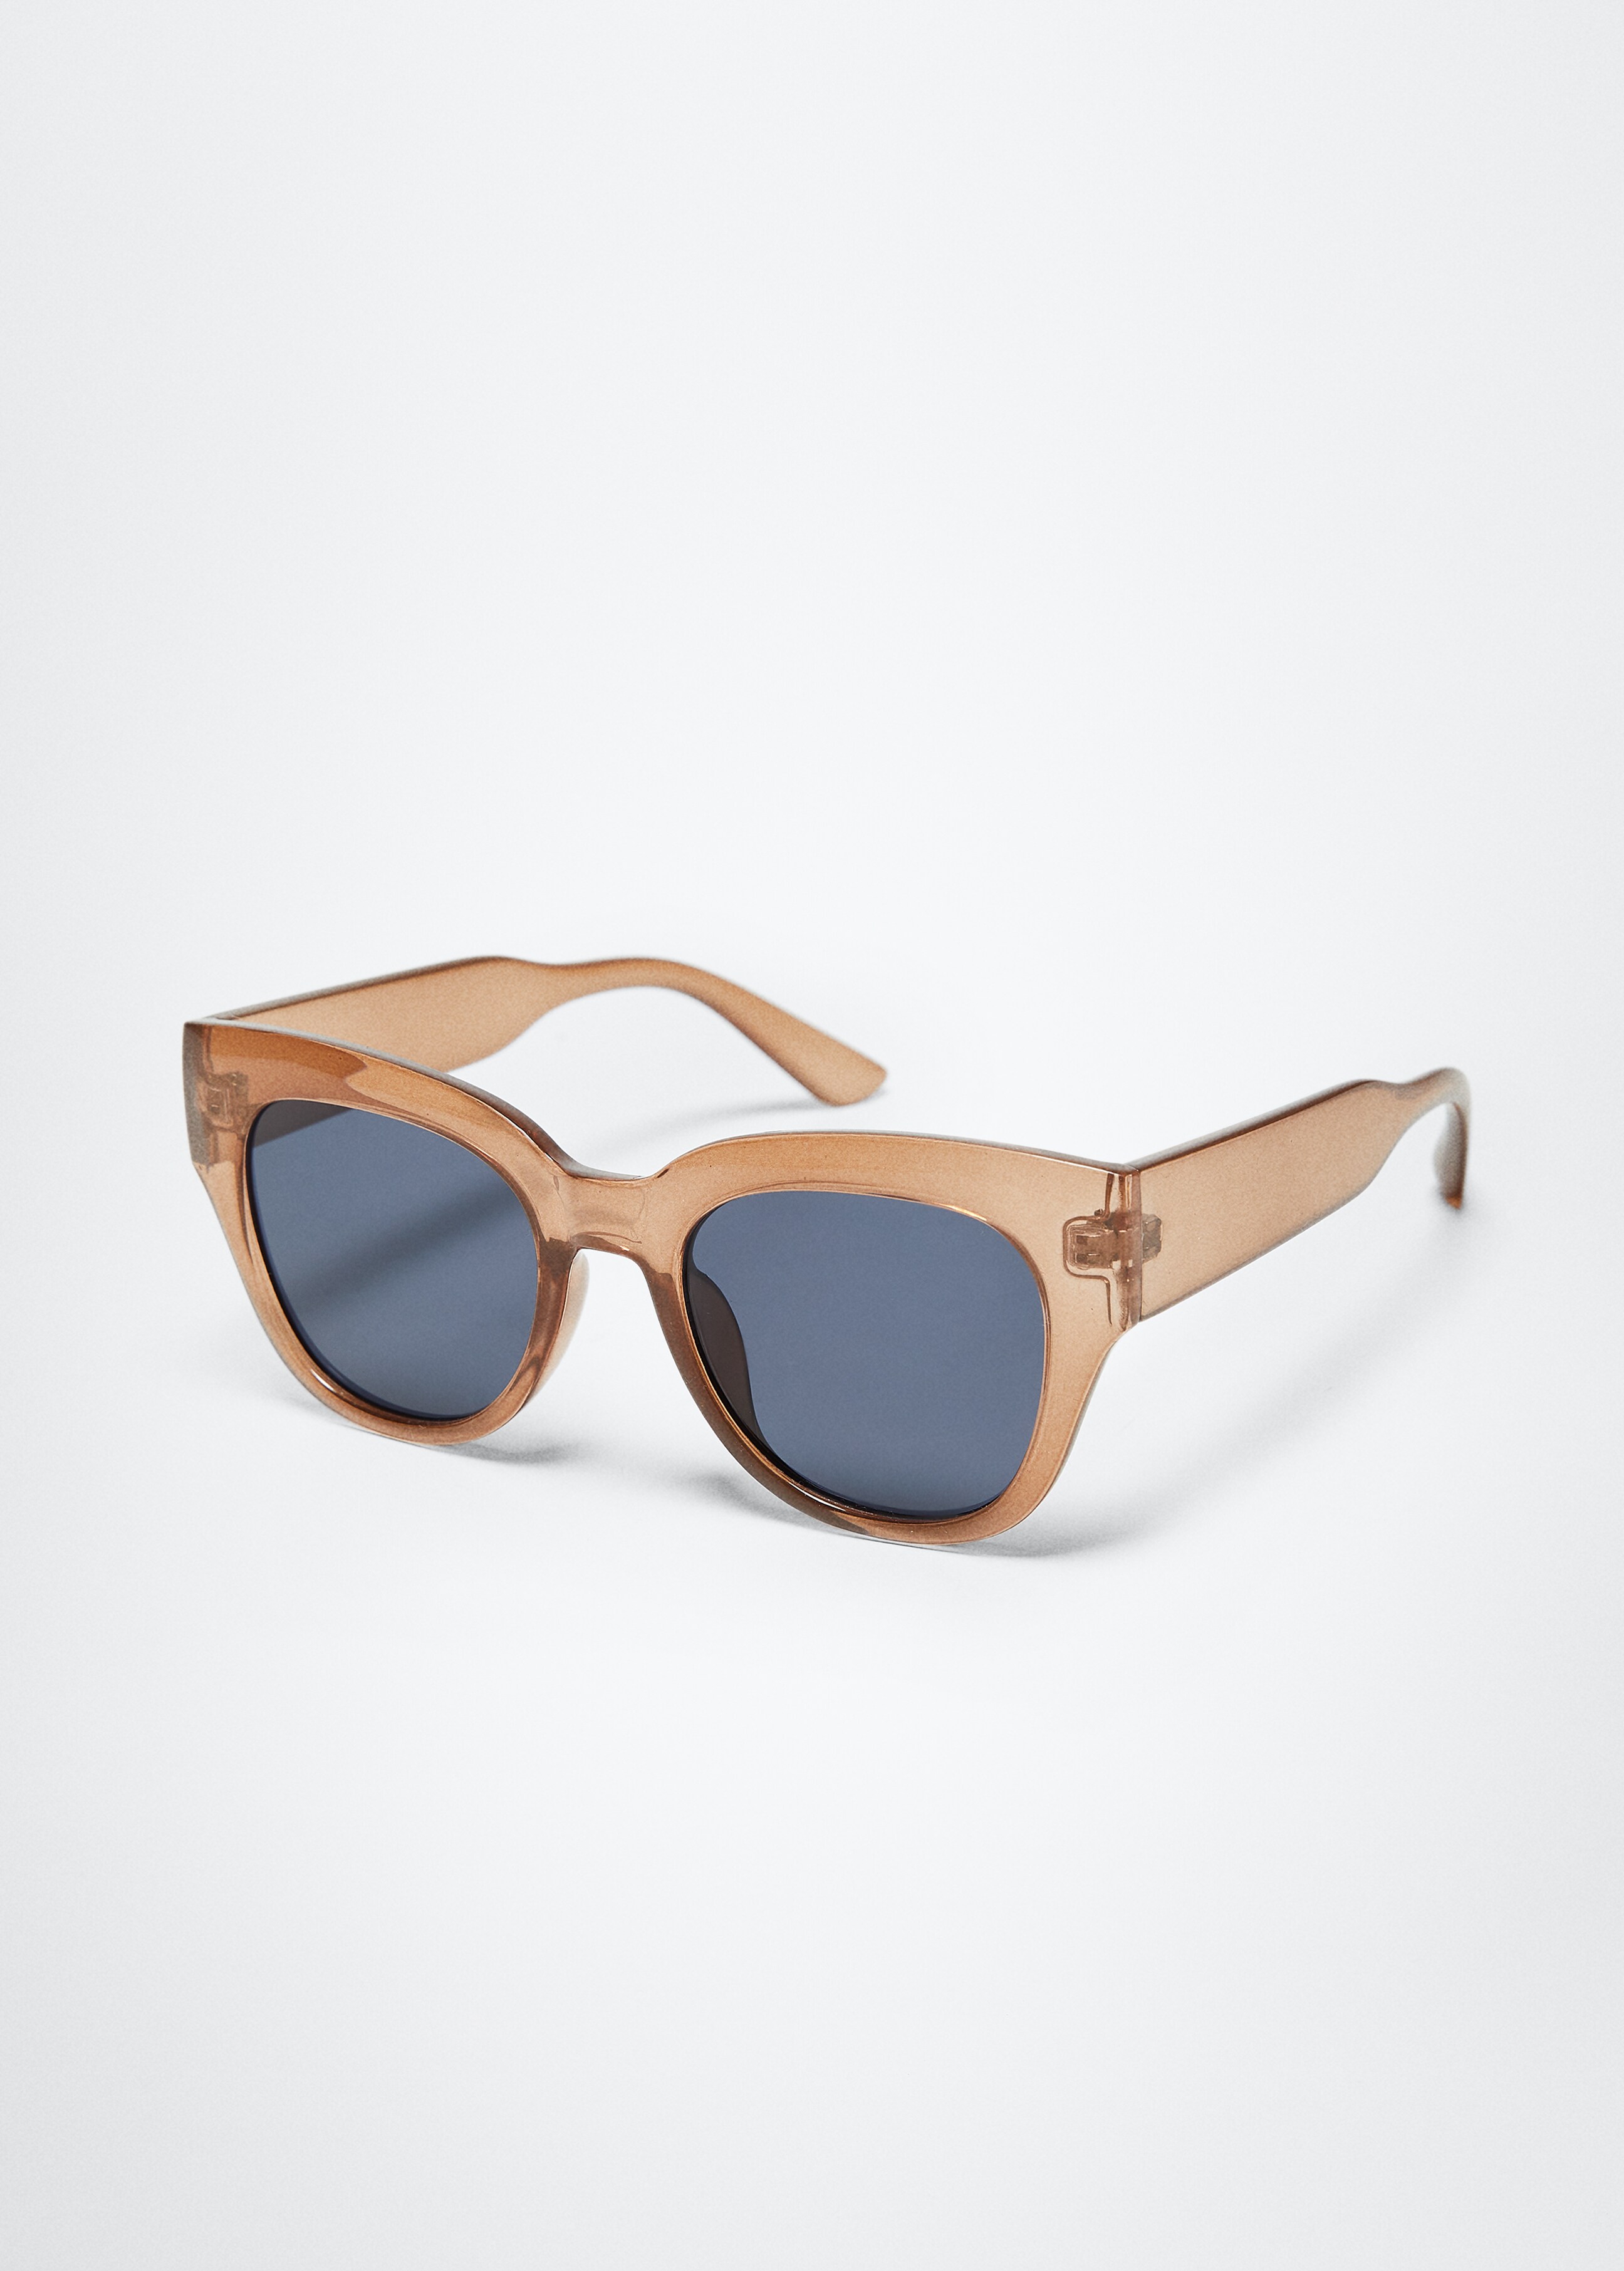 Retro style sunglasses - Details of the article 3